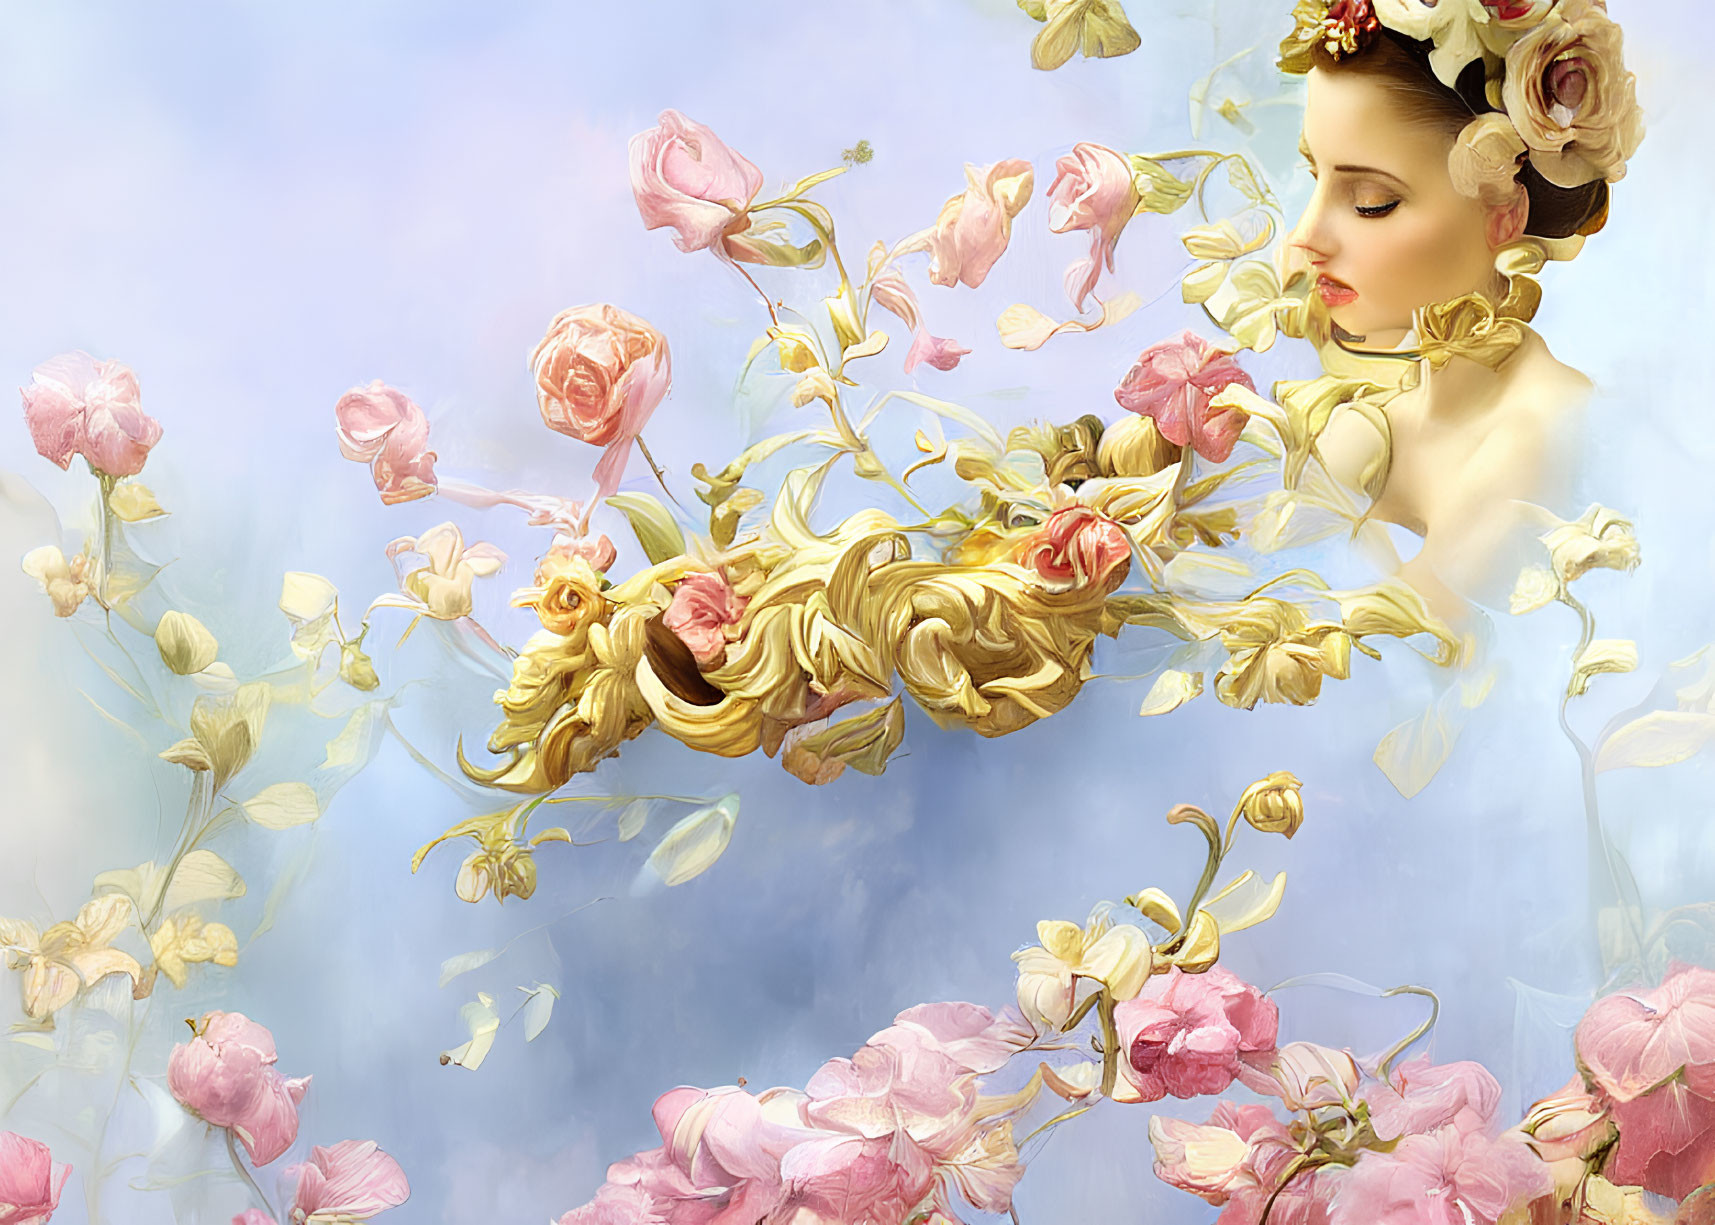 Surreal woman's profile with floral growth on pastel background